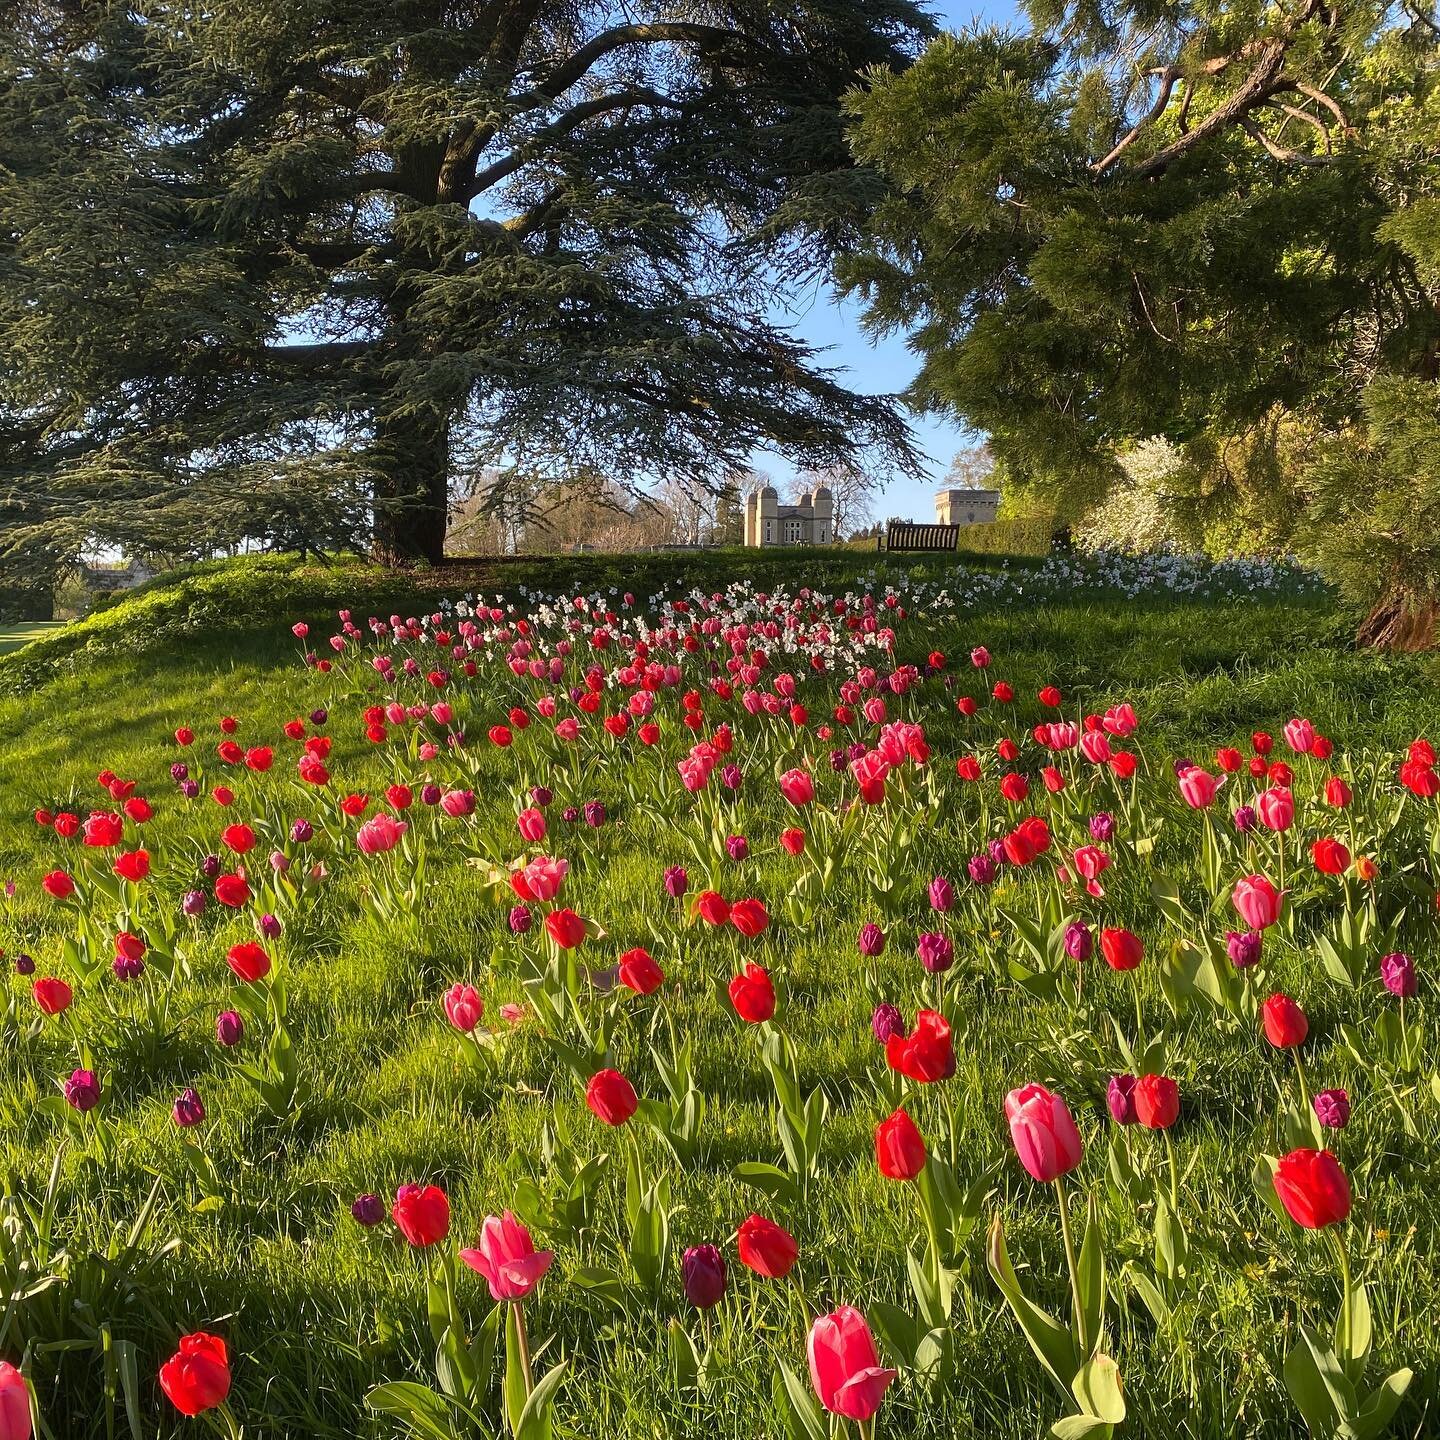 The Cedar Meadow inspires at every season, at every turn and in every mood. The evening sun catches the swathe of tulips and daffodils casting a golden glow over the meadow.
Anyone staying in our holiday cottages can wander out from their door and sh